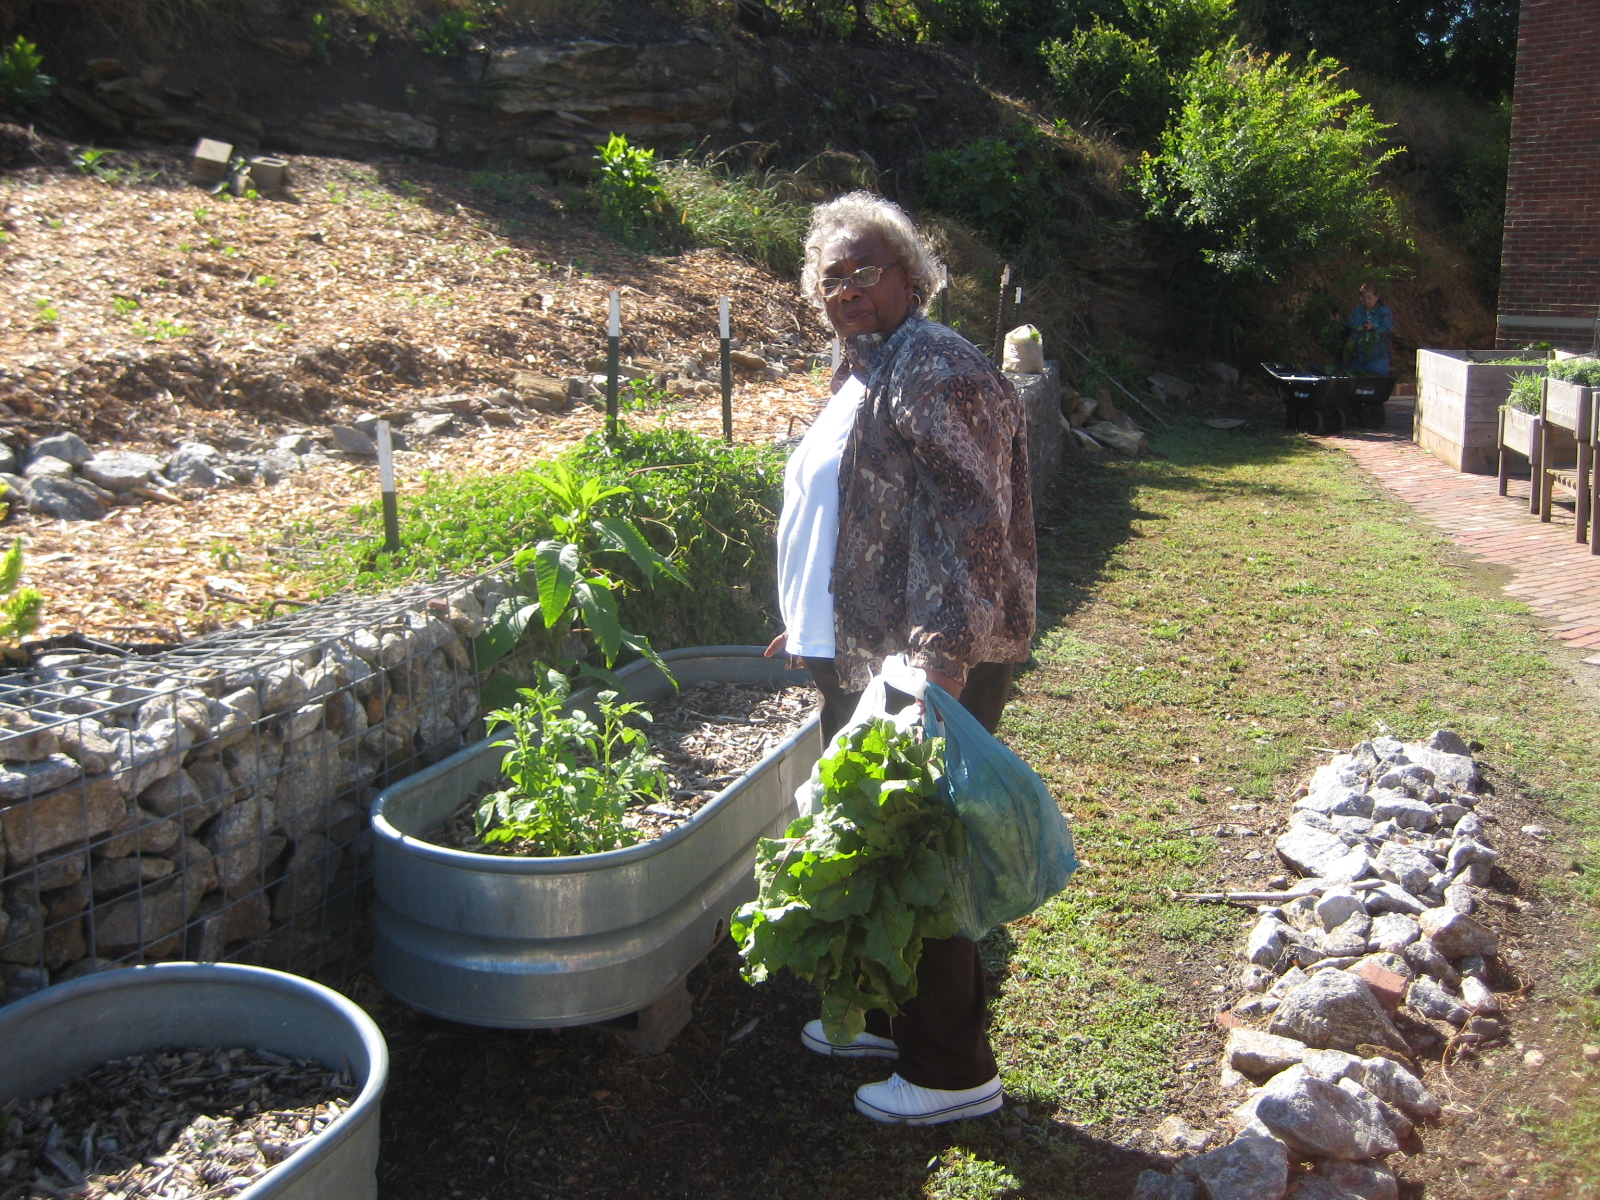 Julia (pictured above) is active in the Council on Aging's Garden Club and helped seed the gardens. Photo courtesy of ACCA